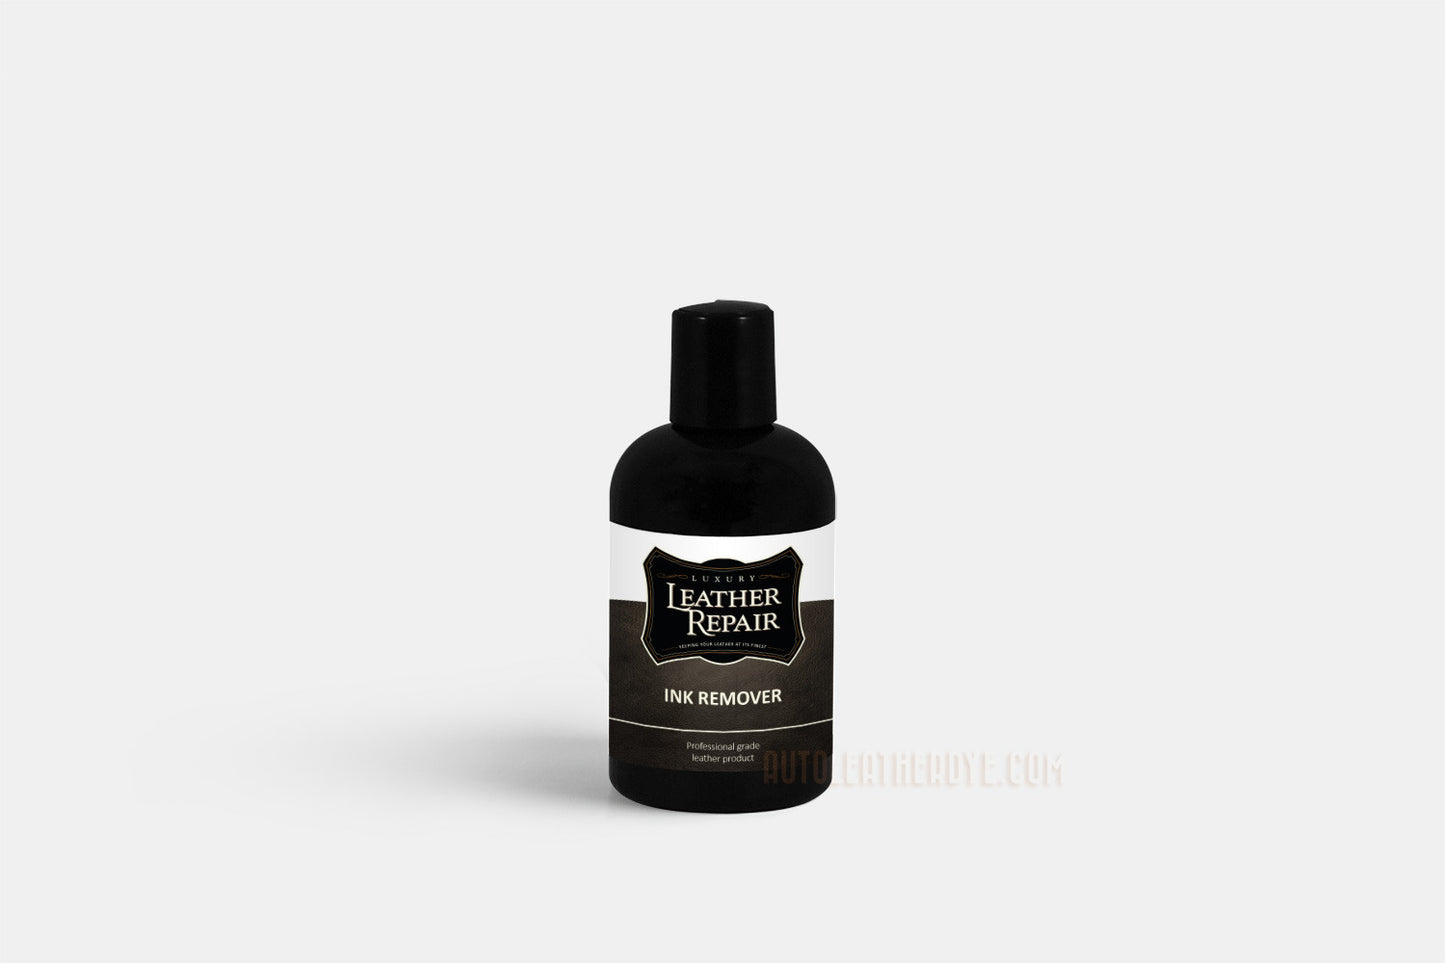 Luxury Leather Repair Ink Remover